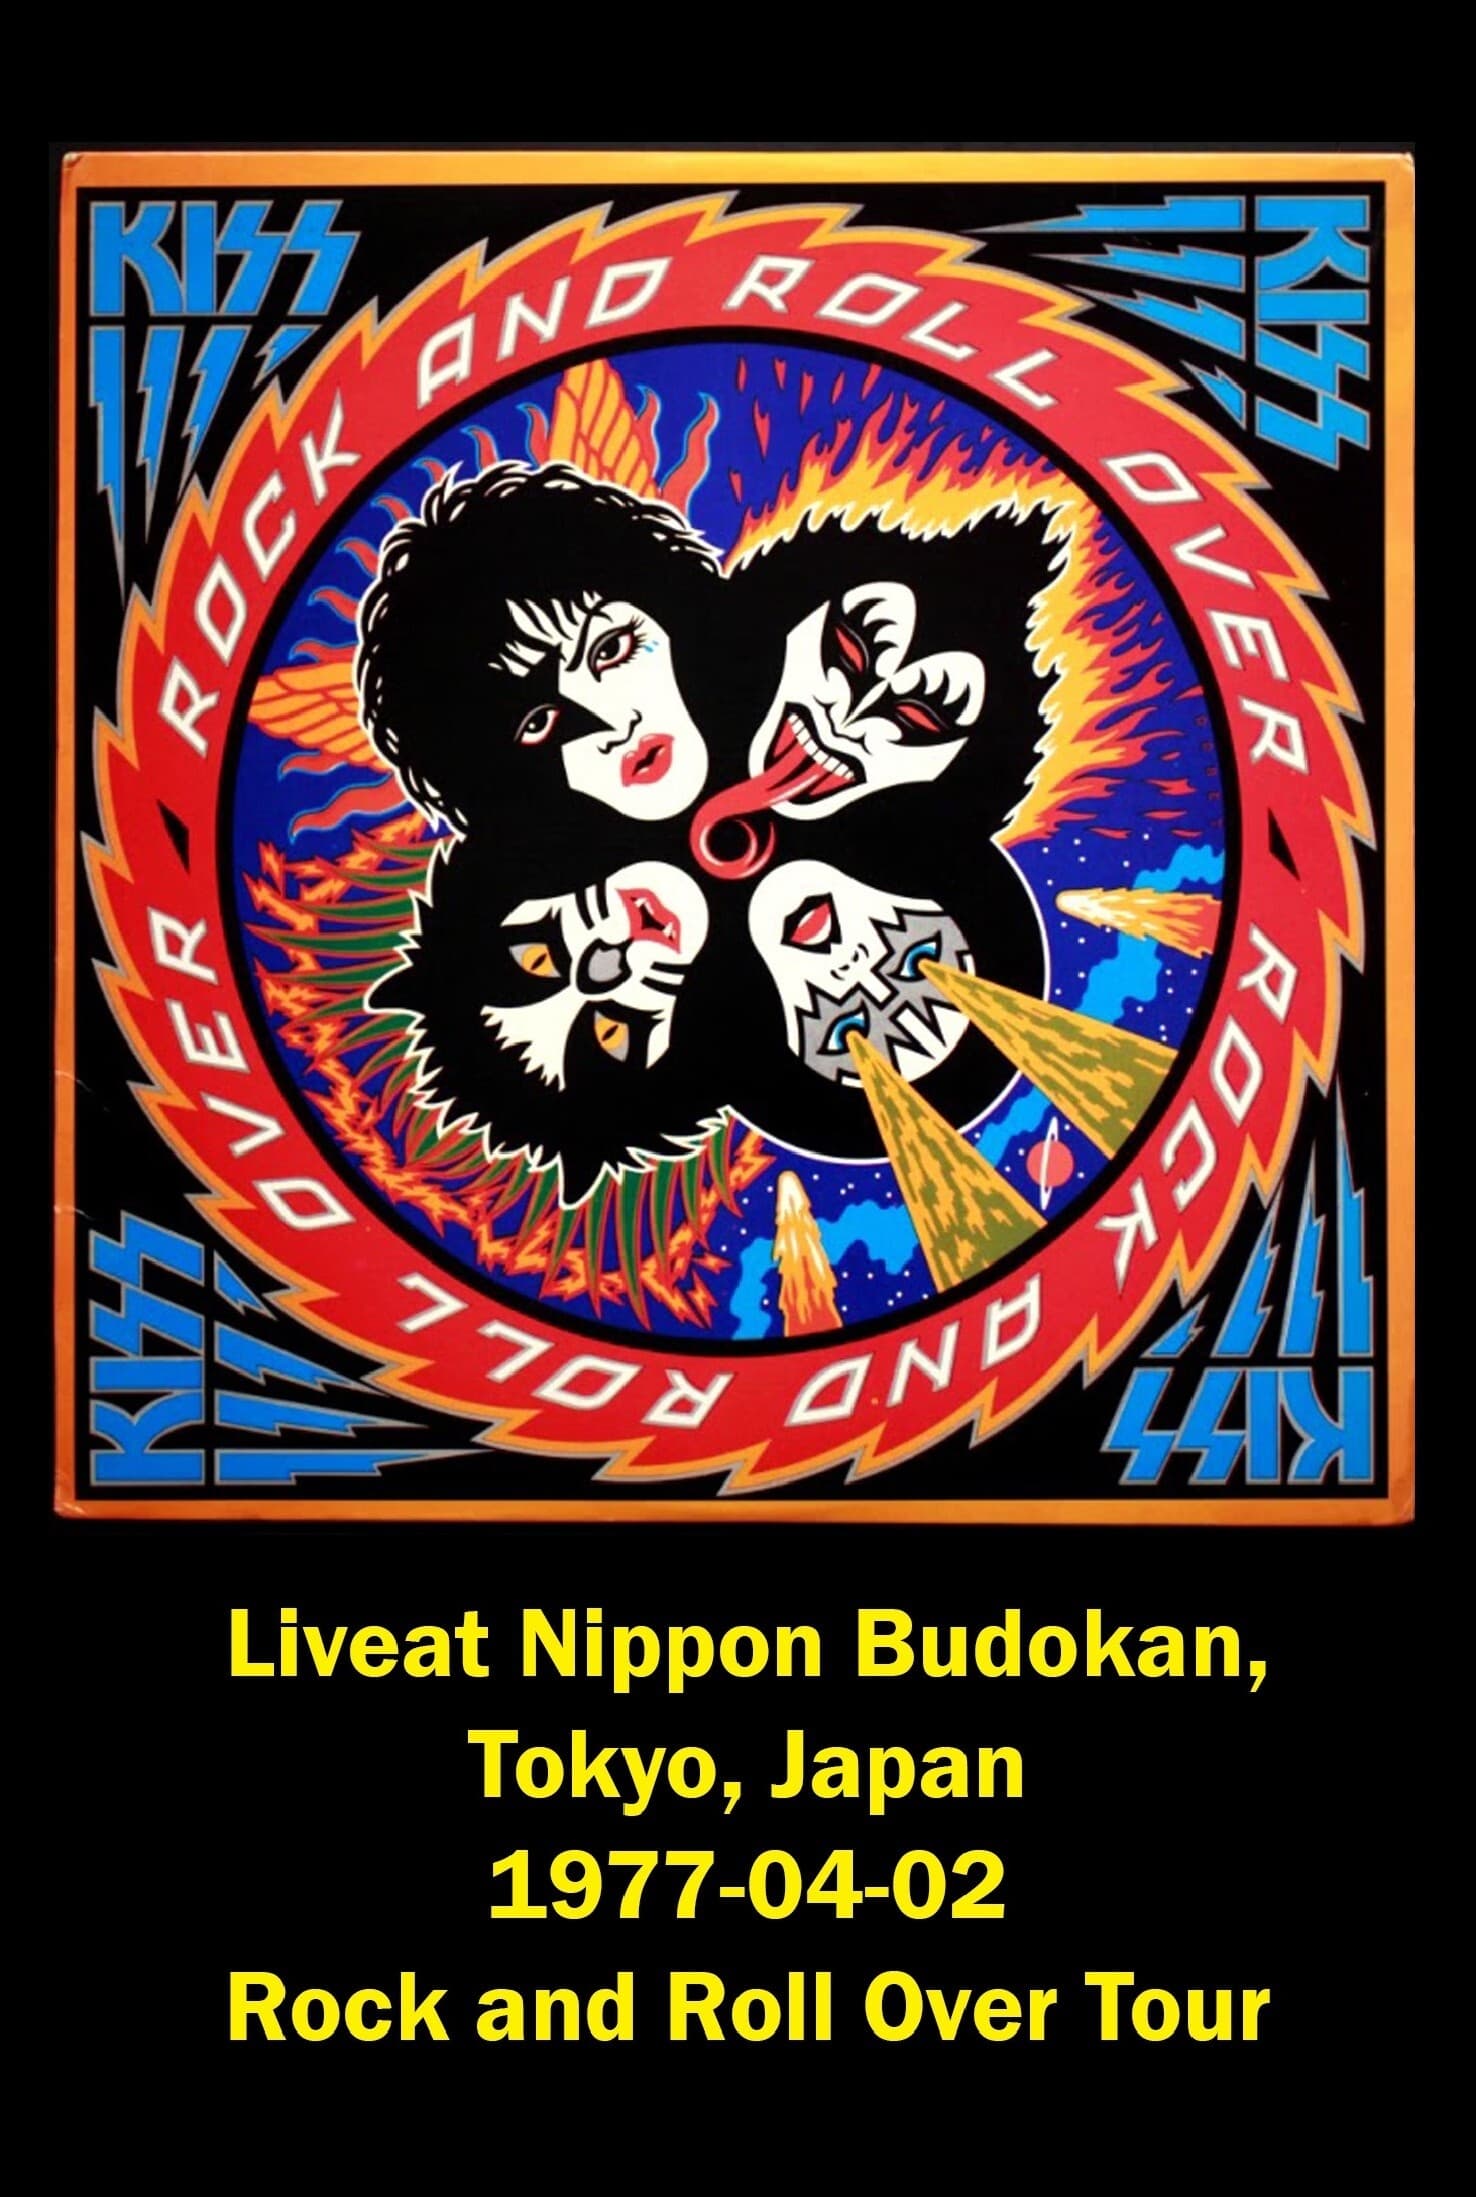 Kiss: Live in Tokyo